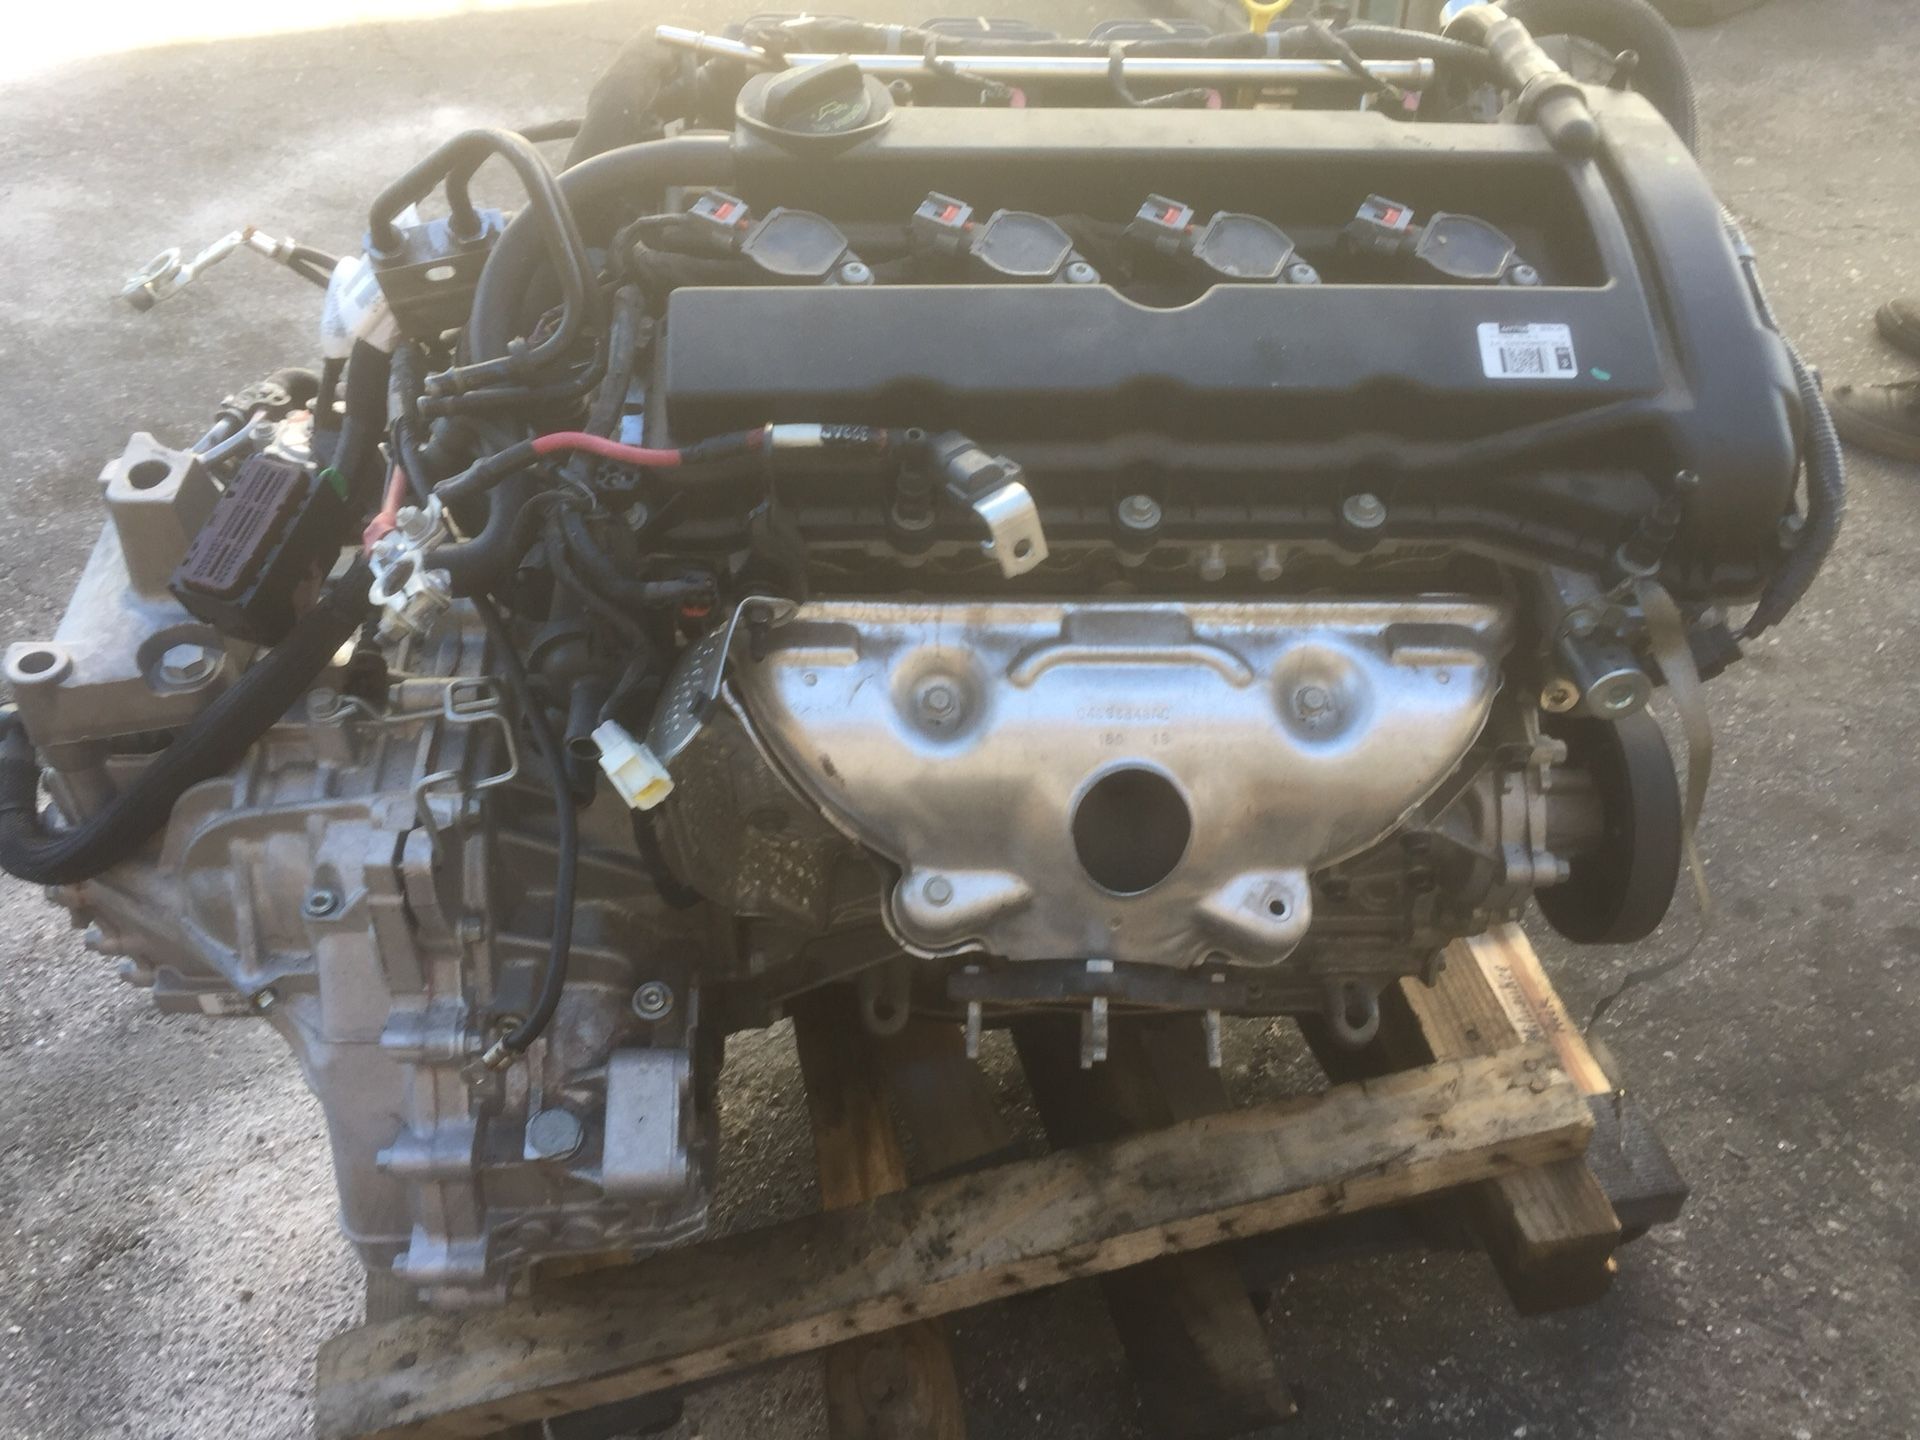 2015 Jeep Patriot 4 cylinder 2.4motor Sold Transmission Ok parting out 2007 Toyota Have doors rt. & Lt one and other parts car os Gone Ok Read post !